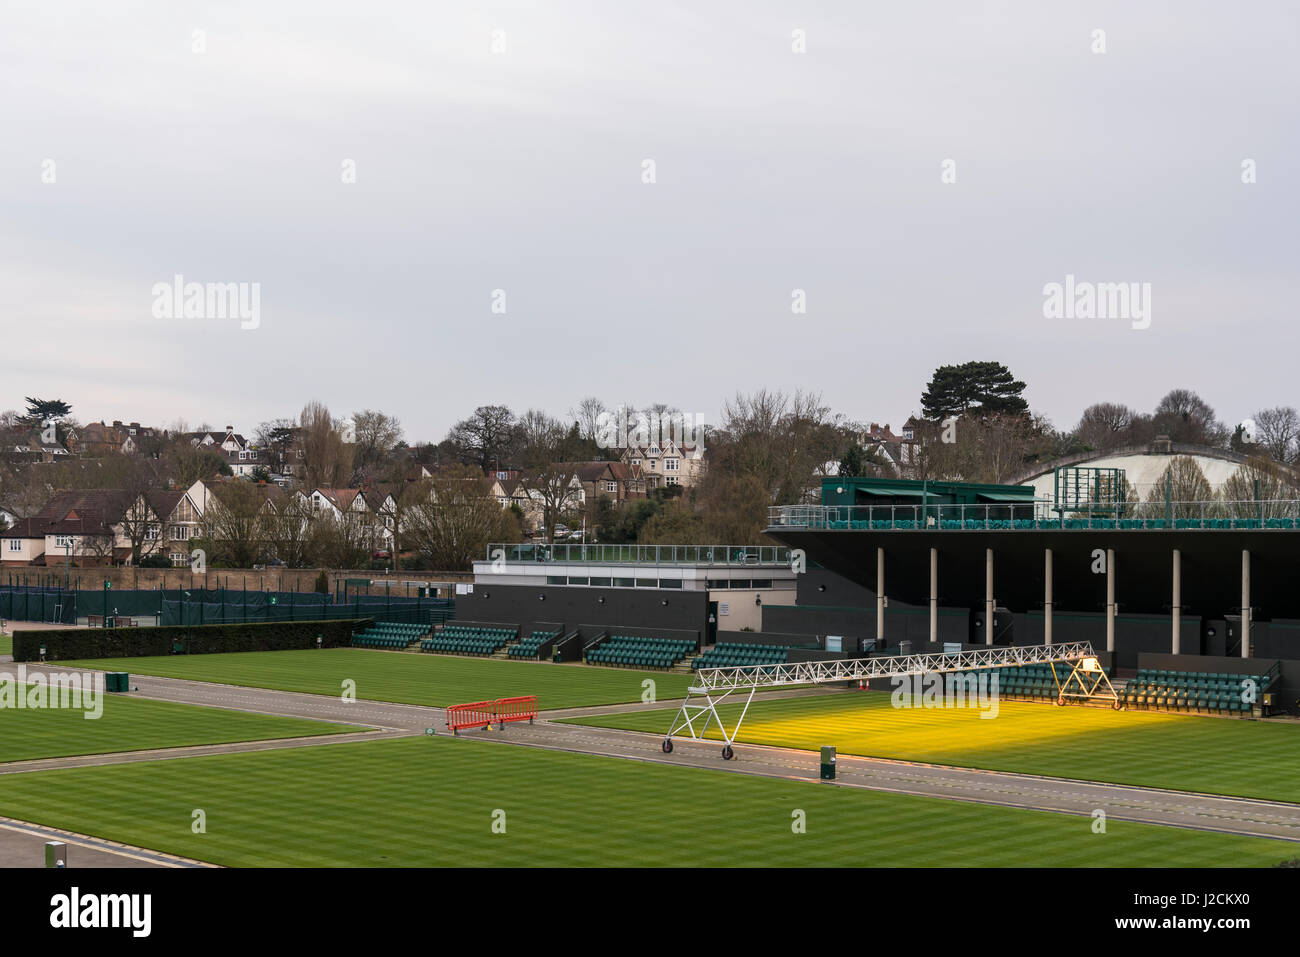 Growing the grass at the All England Lawn Tennis and Croquet Club Stock Photo